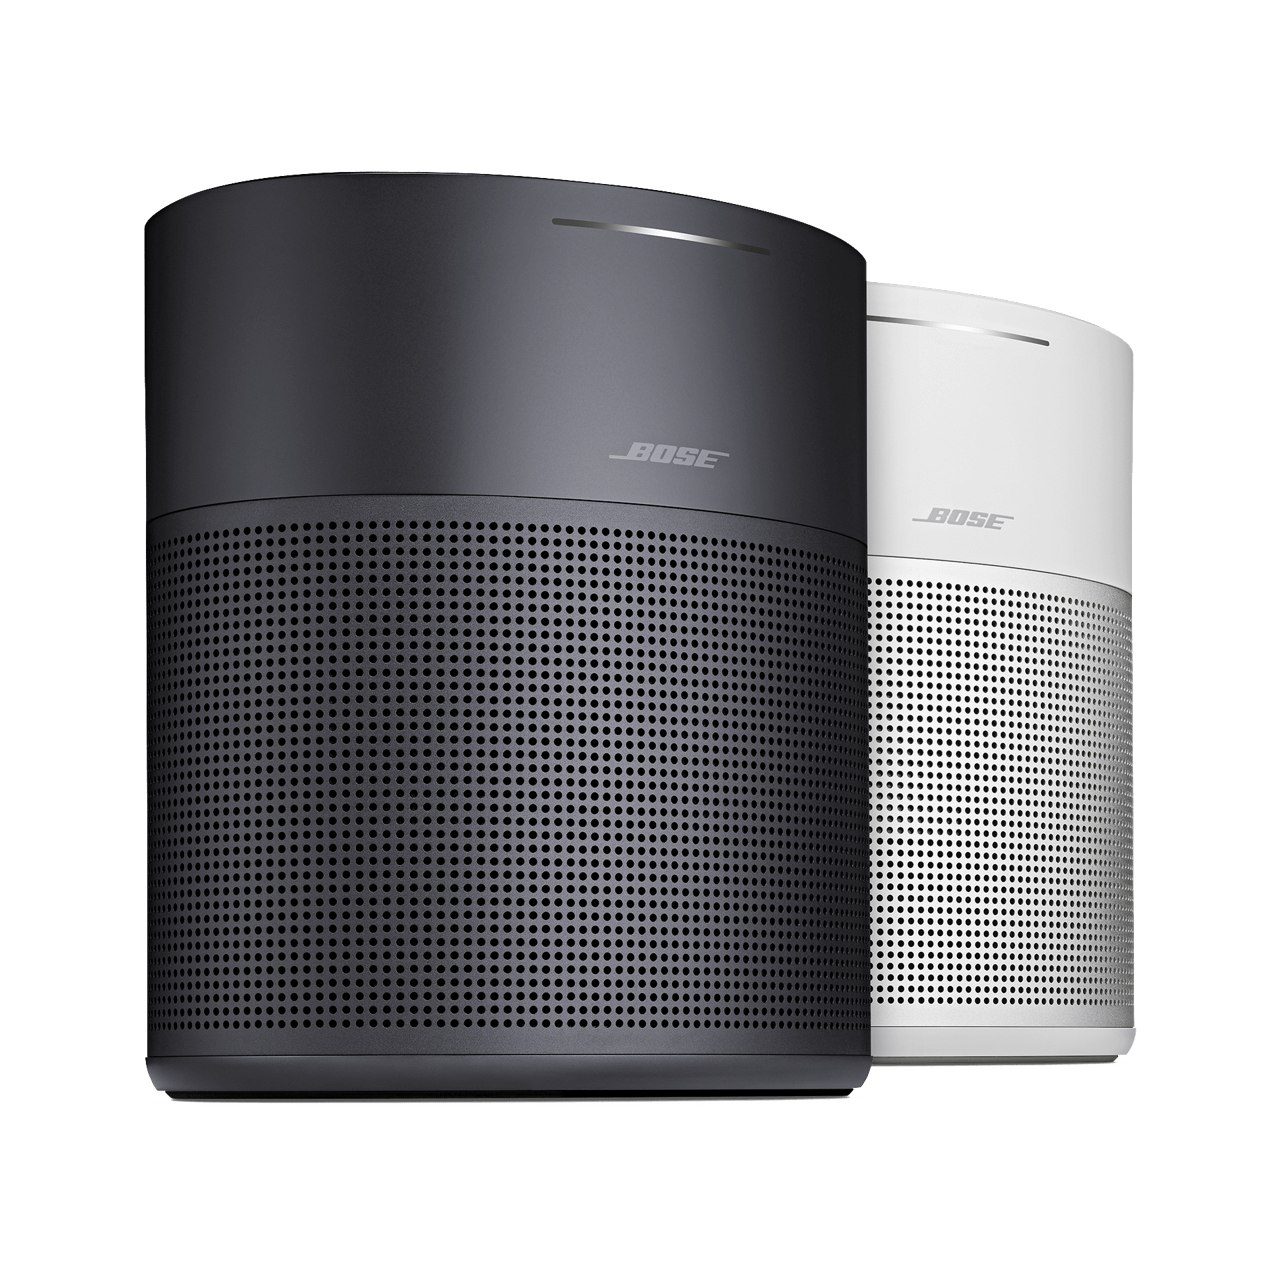 The Bose Home Speaker 300 brings room-rocking bass and 360° lifelike sound to a space-saving size. Plus, with built-in voice assistants, like the Google Assistant and Alexa, all of your favourite music is just an ask away. Turn it up and feel the difference.